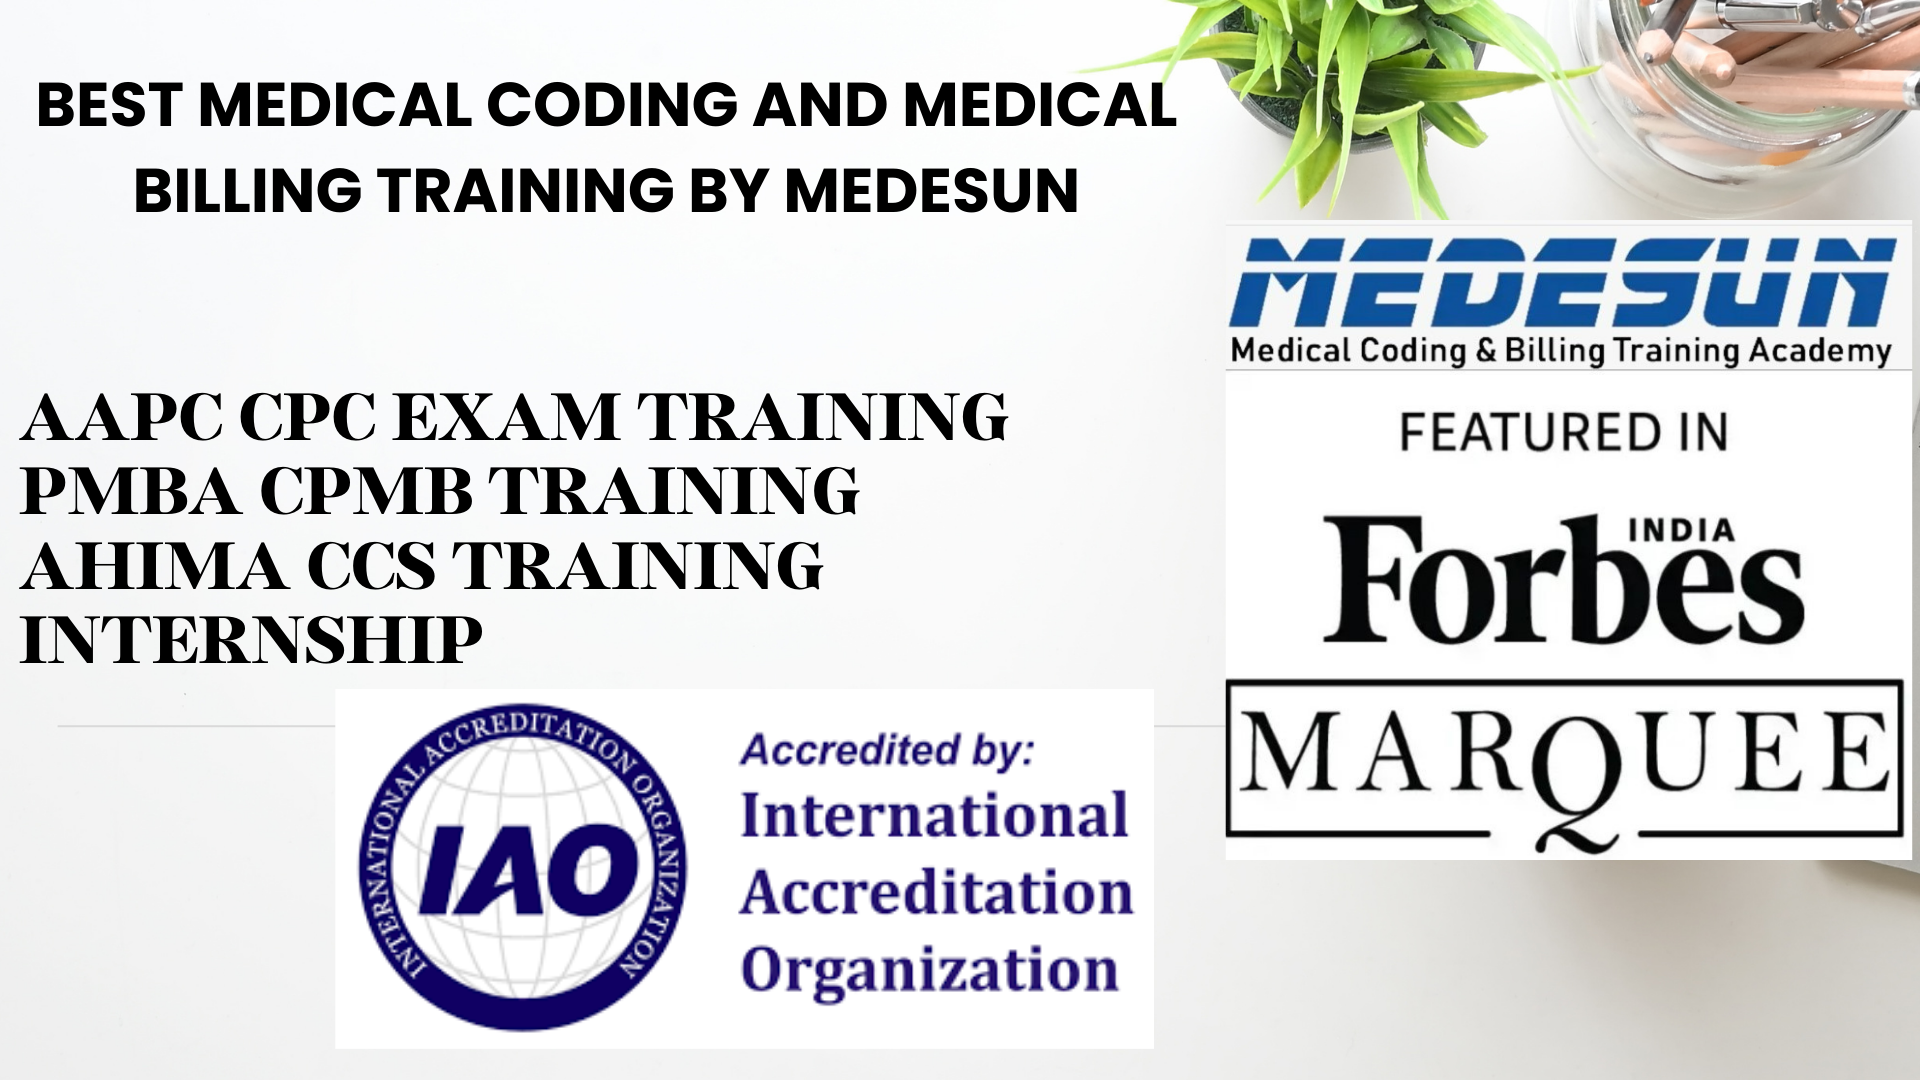 Best Medical Coding Training at Hyderabad by MEDESUN Academy